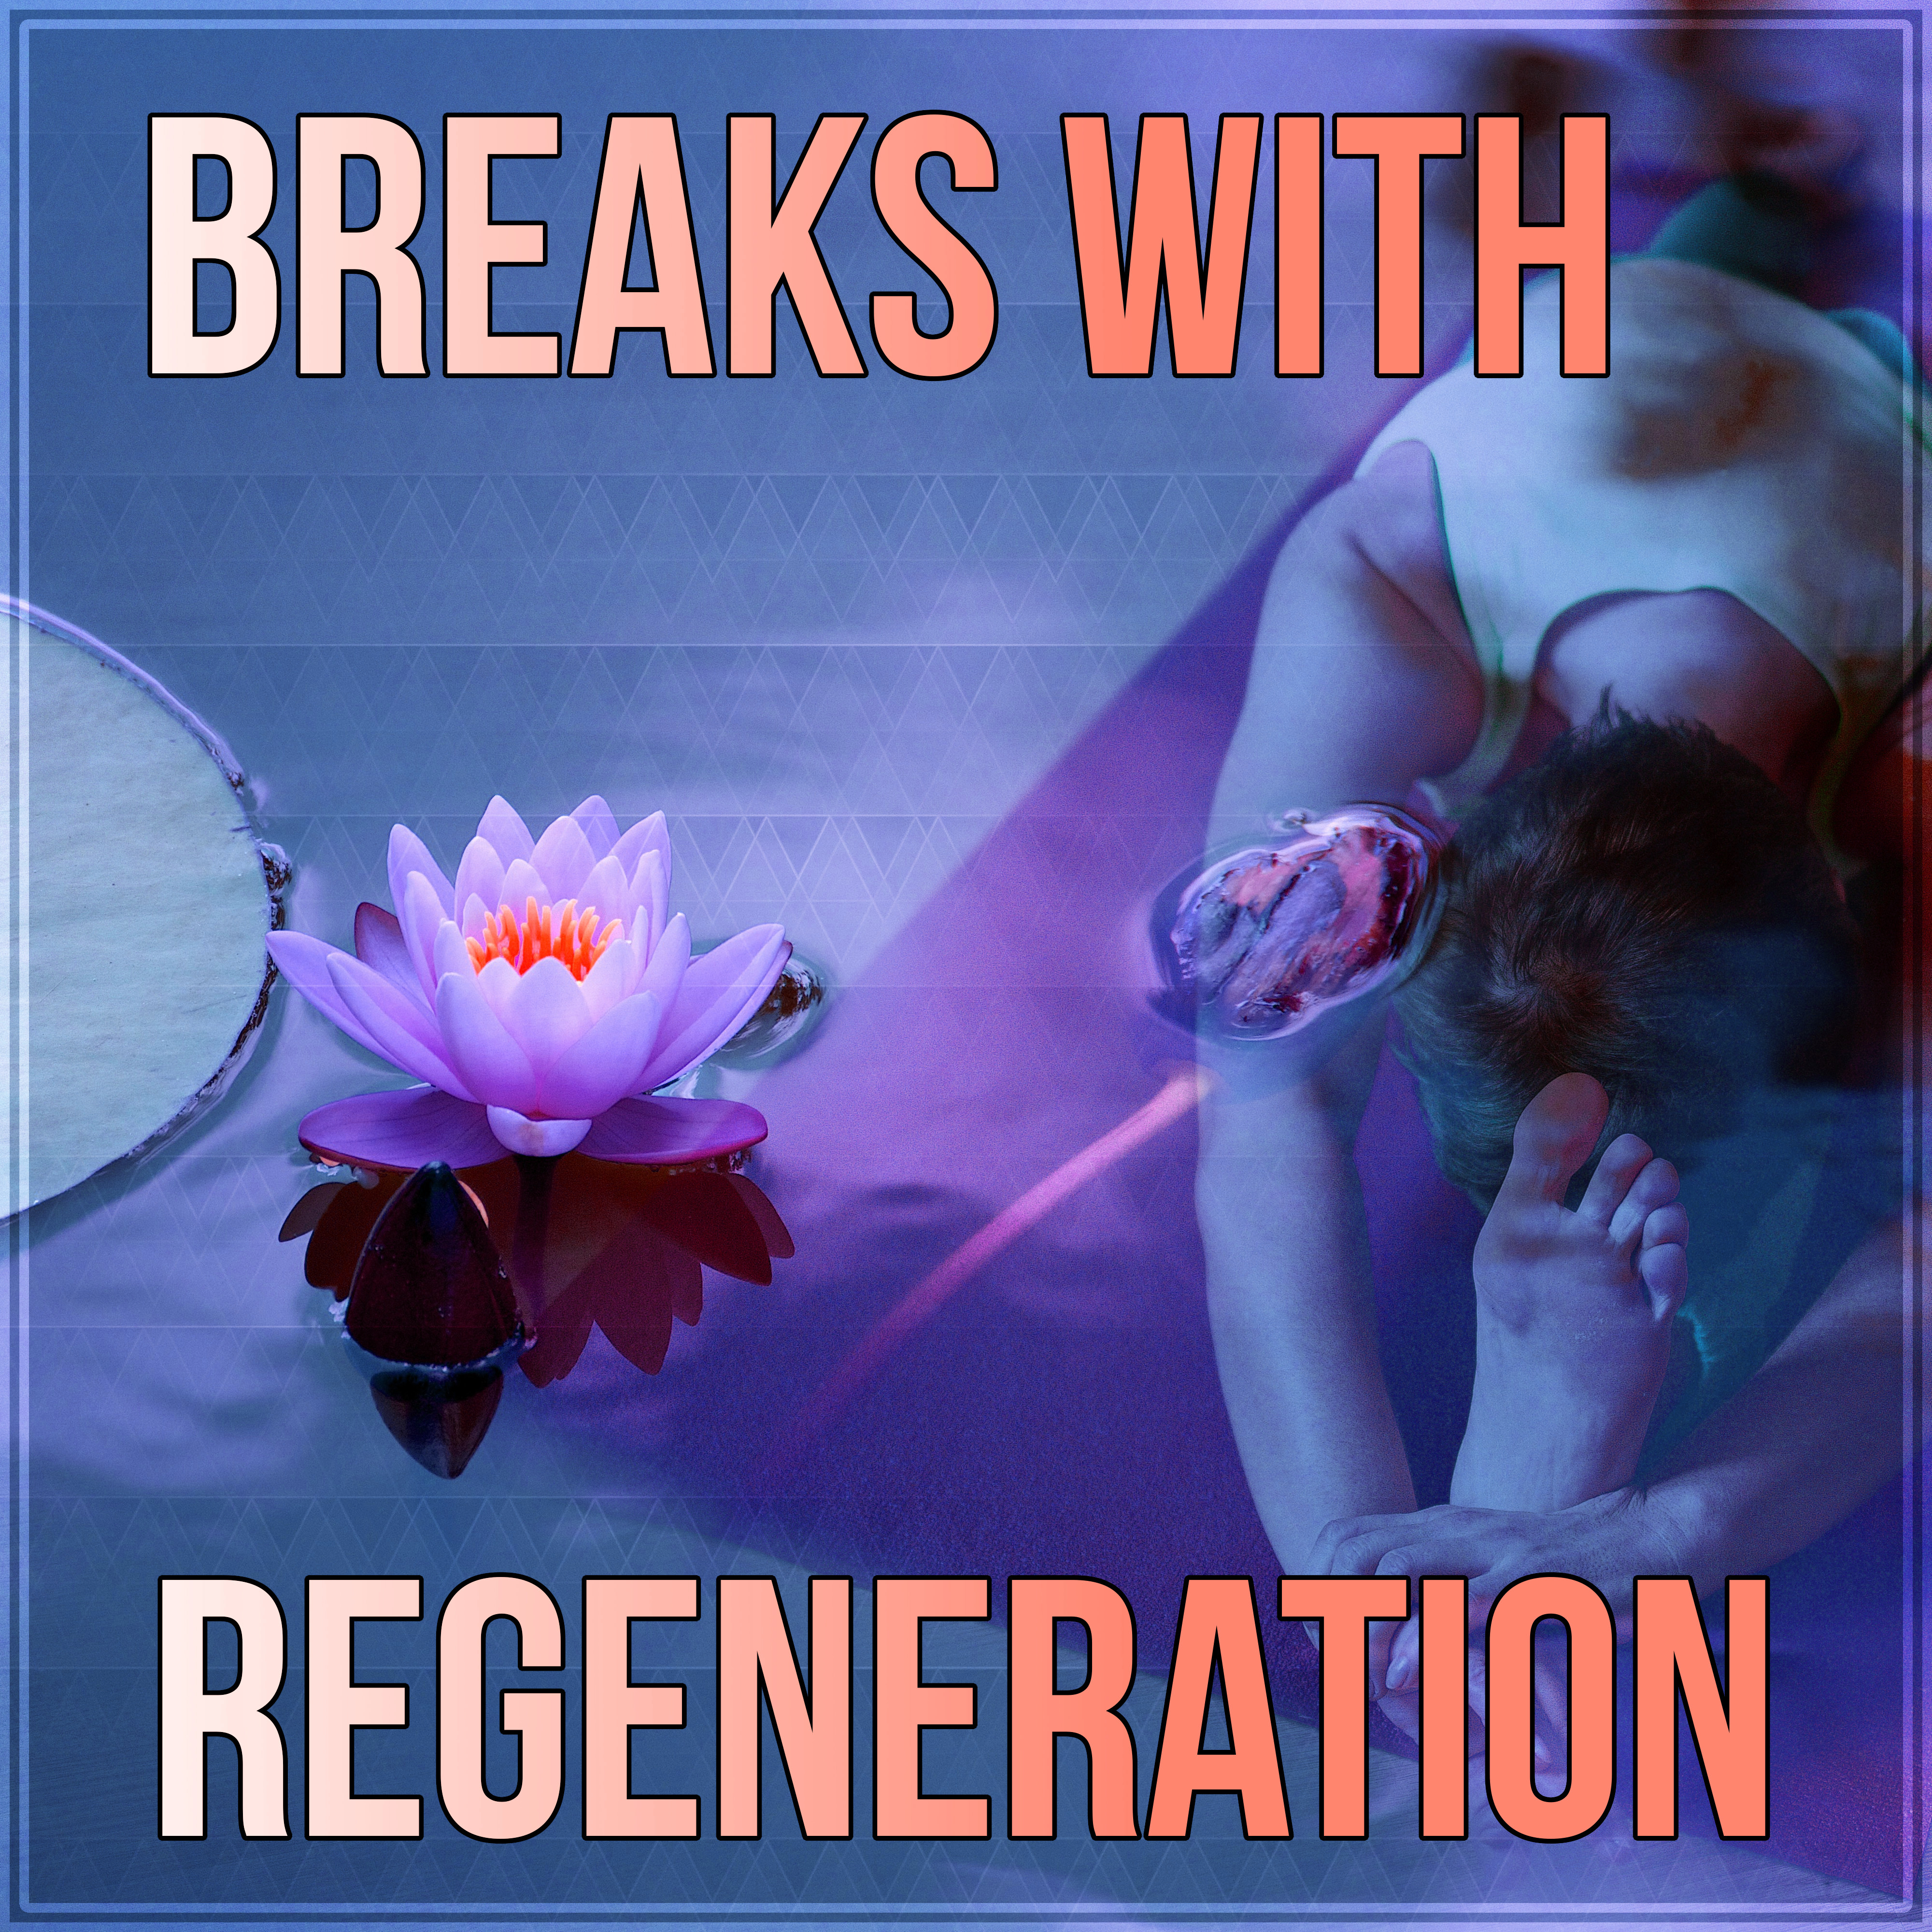 Breaks with Regeneration  Relaxing Music for Serenity, Tranquility Spa, Calm, Magnetic Moments with Nature Sounds, Om Chanting, Health Care